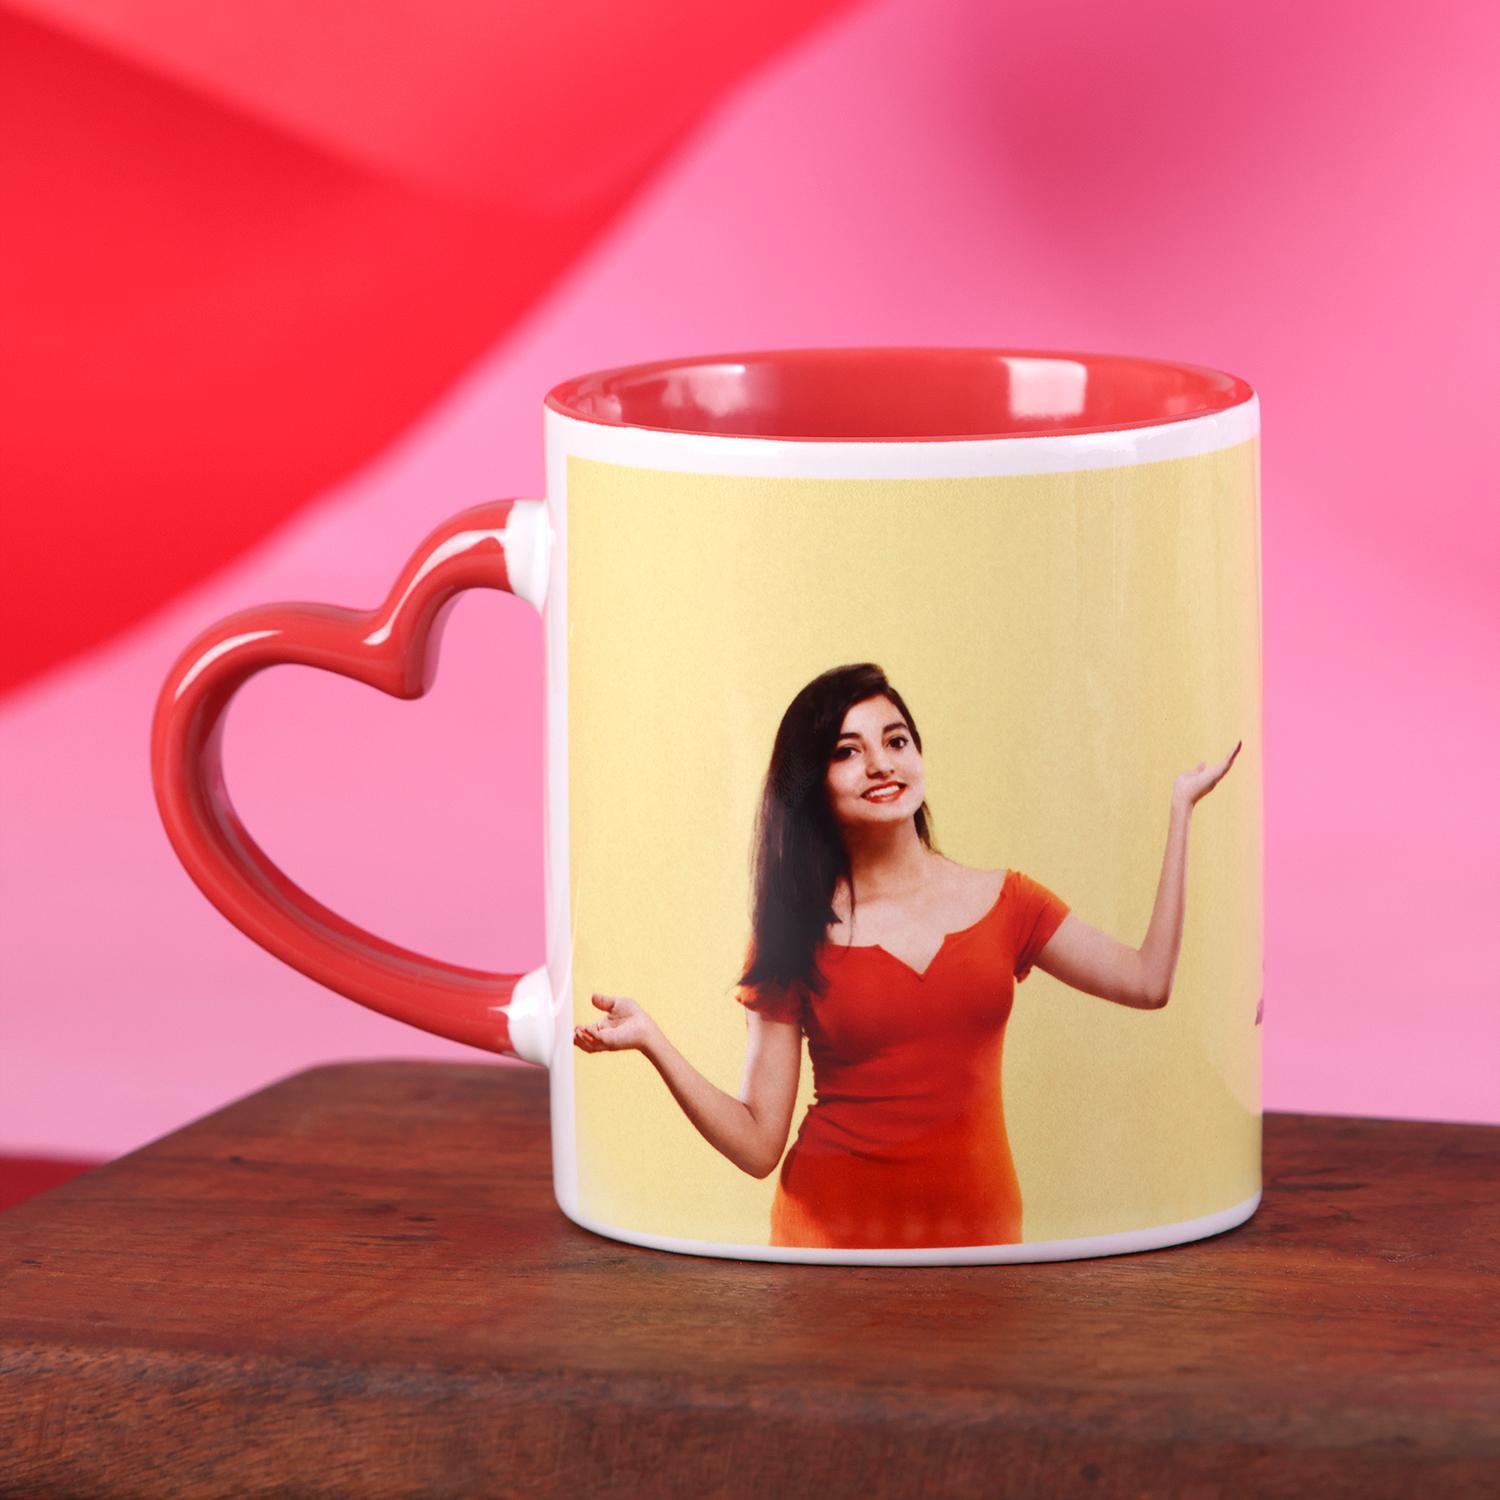 Best-personalized mugs under 500 , Avail it from zoom color print . Here  you can get some best-customized mugs for all age groups to make your near  & dear ones feel loved.